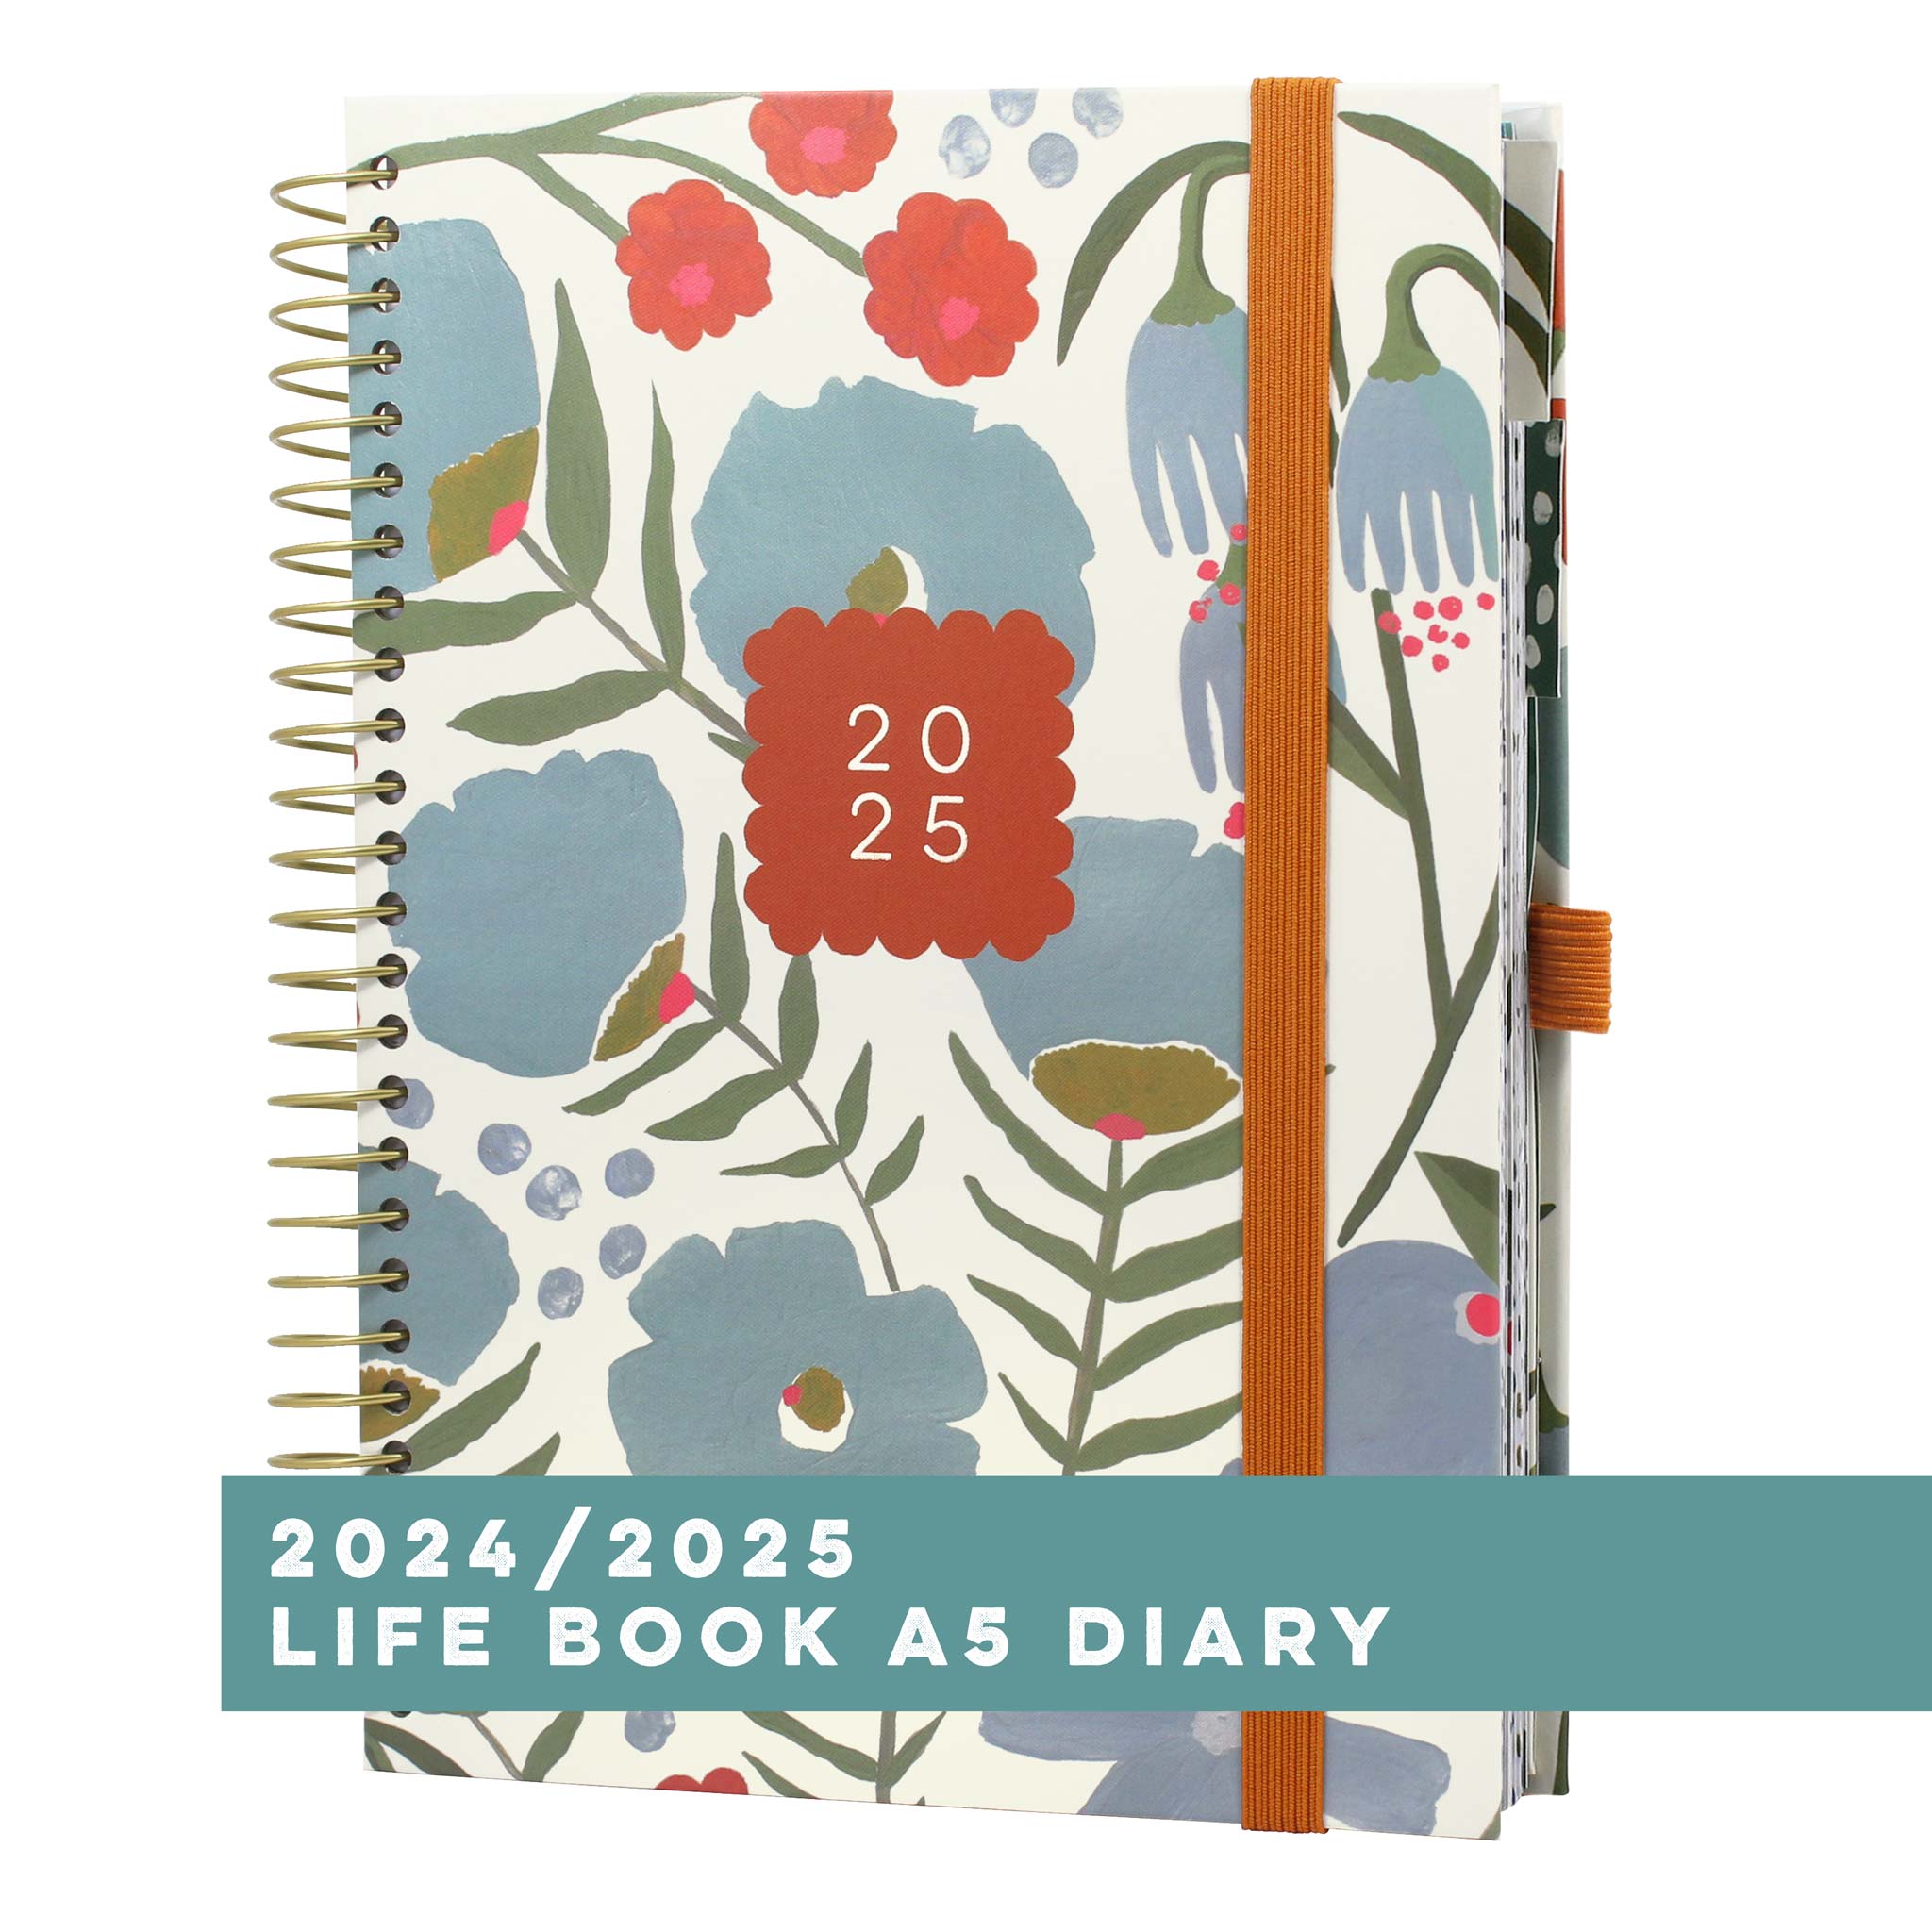 Boxclever Press Life Book Diary 2024/2025 with a floral design